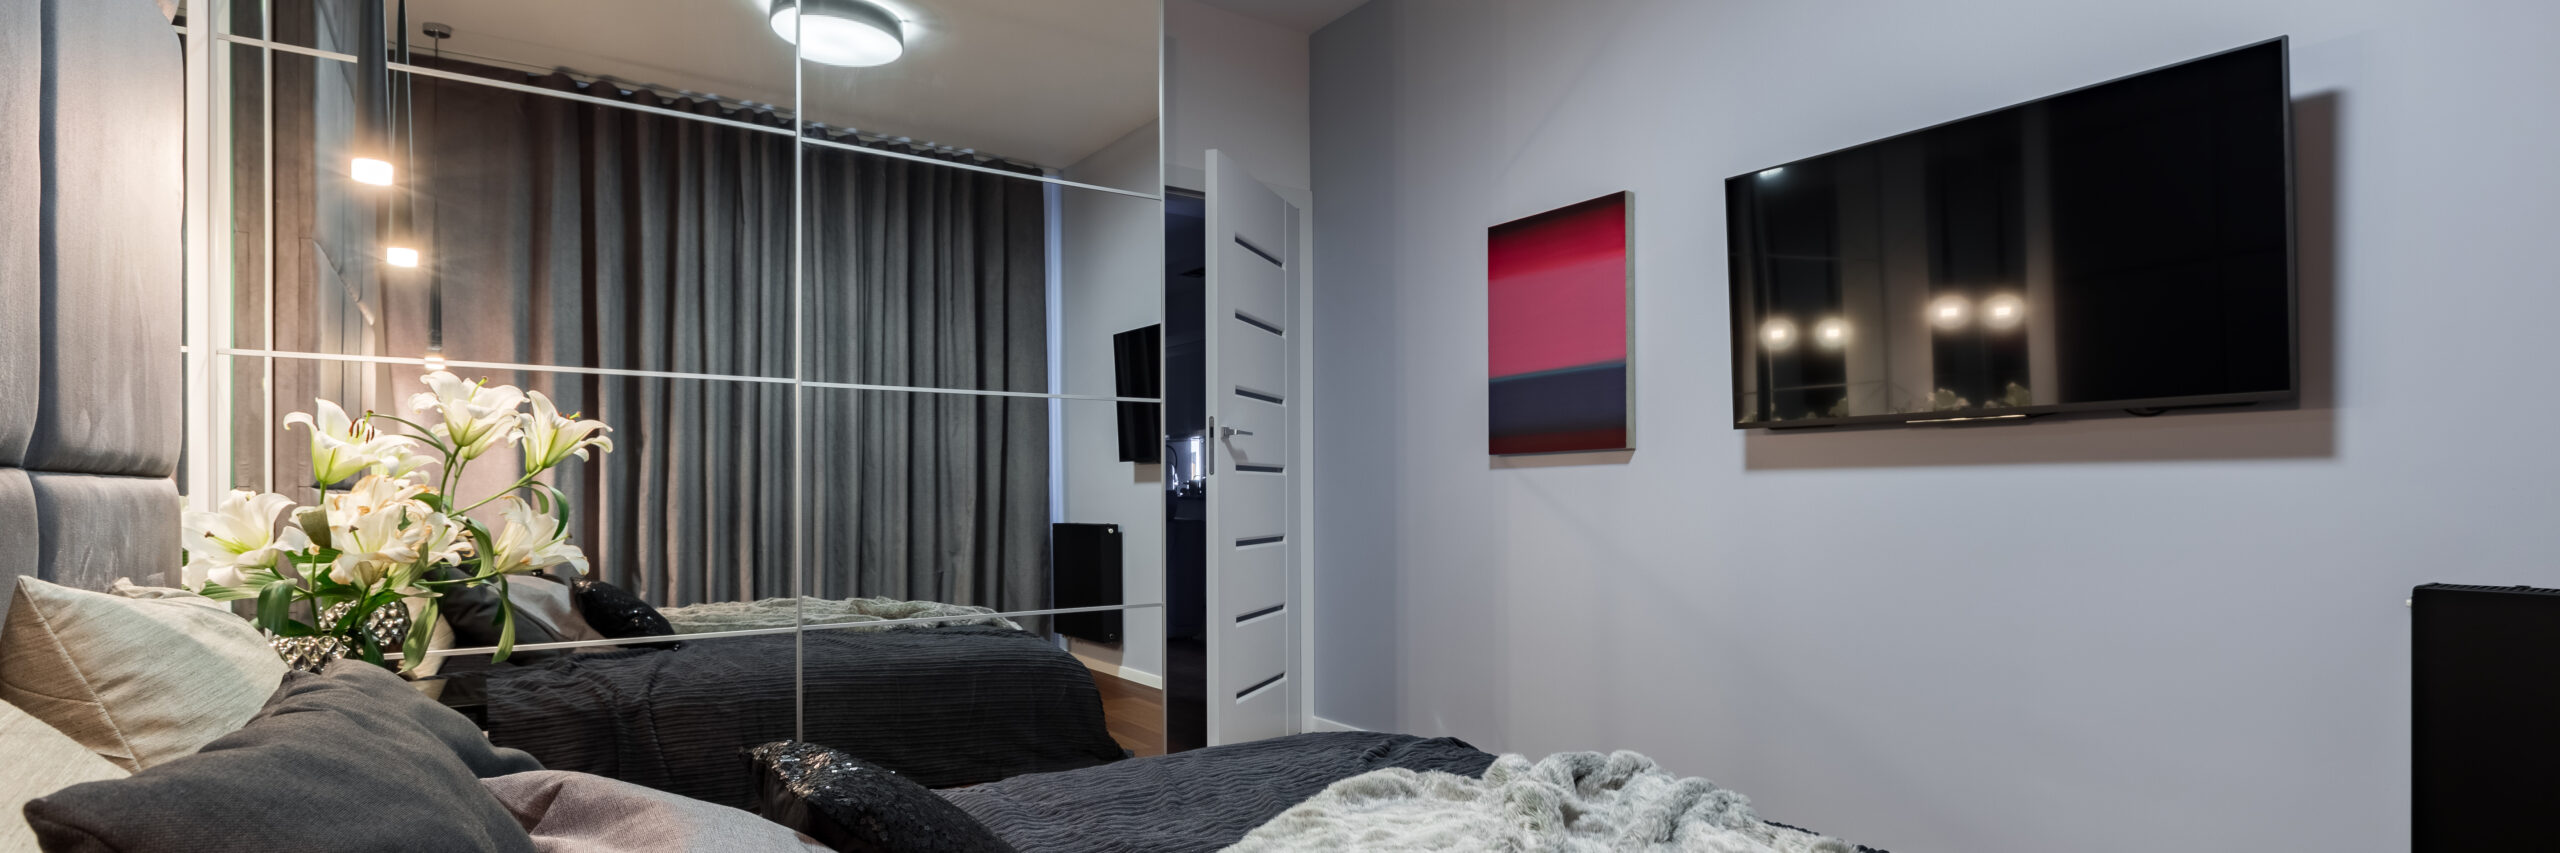 Elegant bedroom with double bed, mirrored wardrobe and tv, panorama